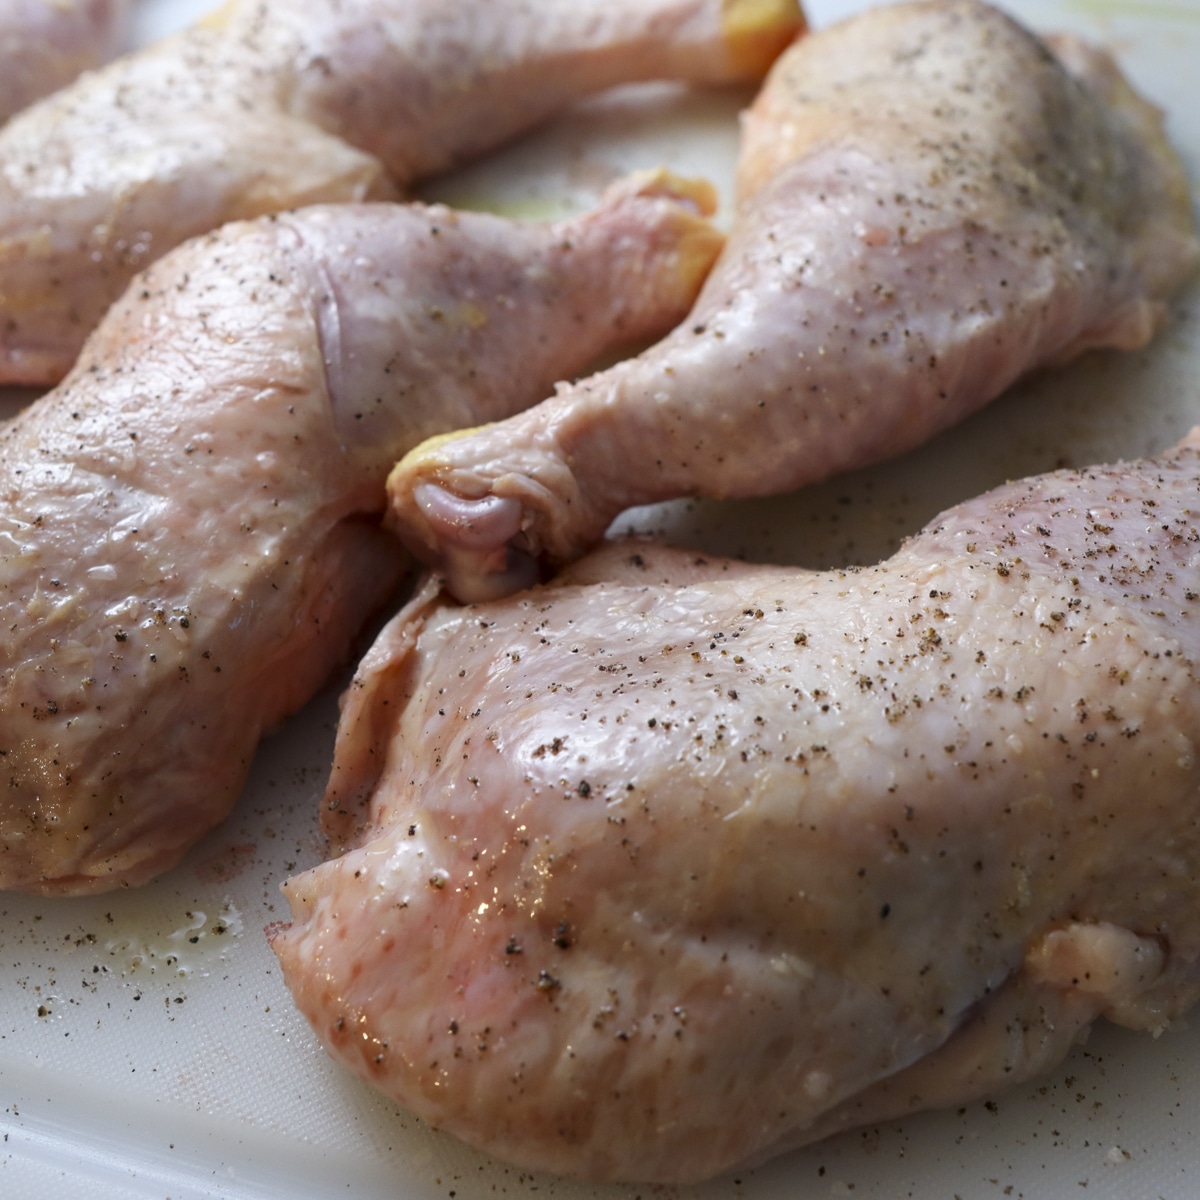 oil and pepper and salt chicken leg quarters on a cutting board
